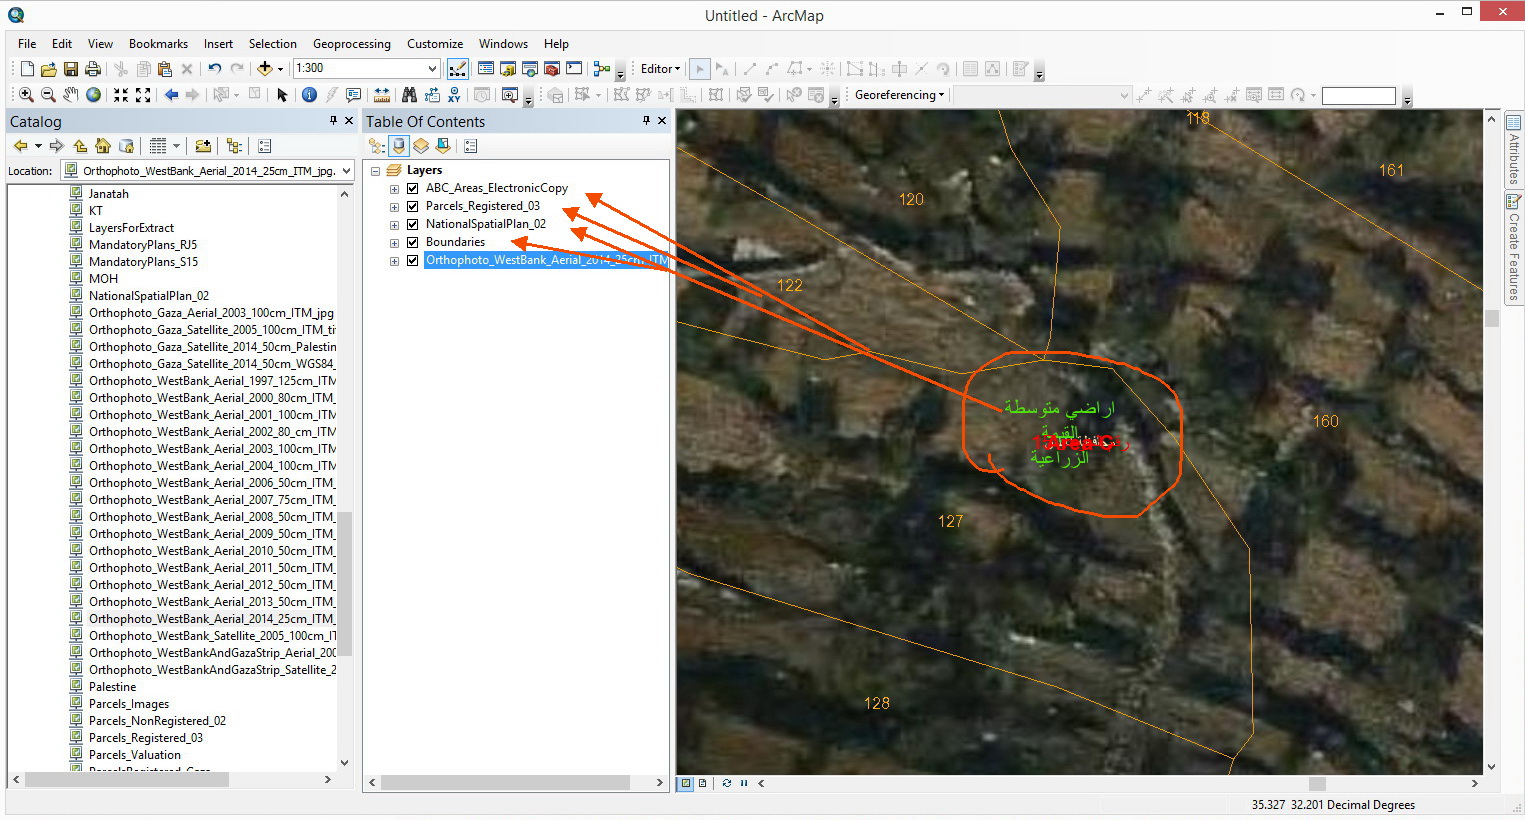 annotation target not working in arcgis 10.3